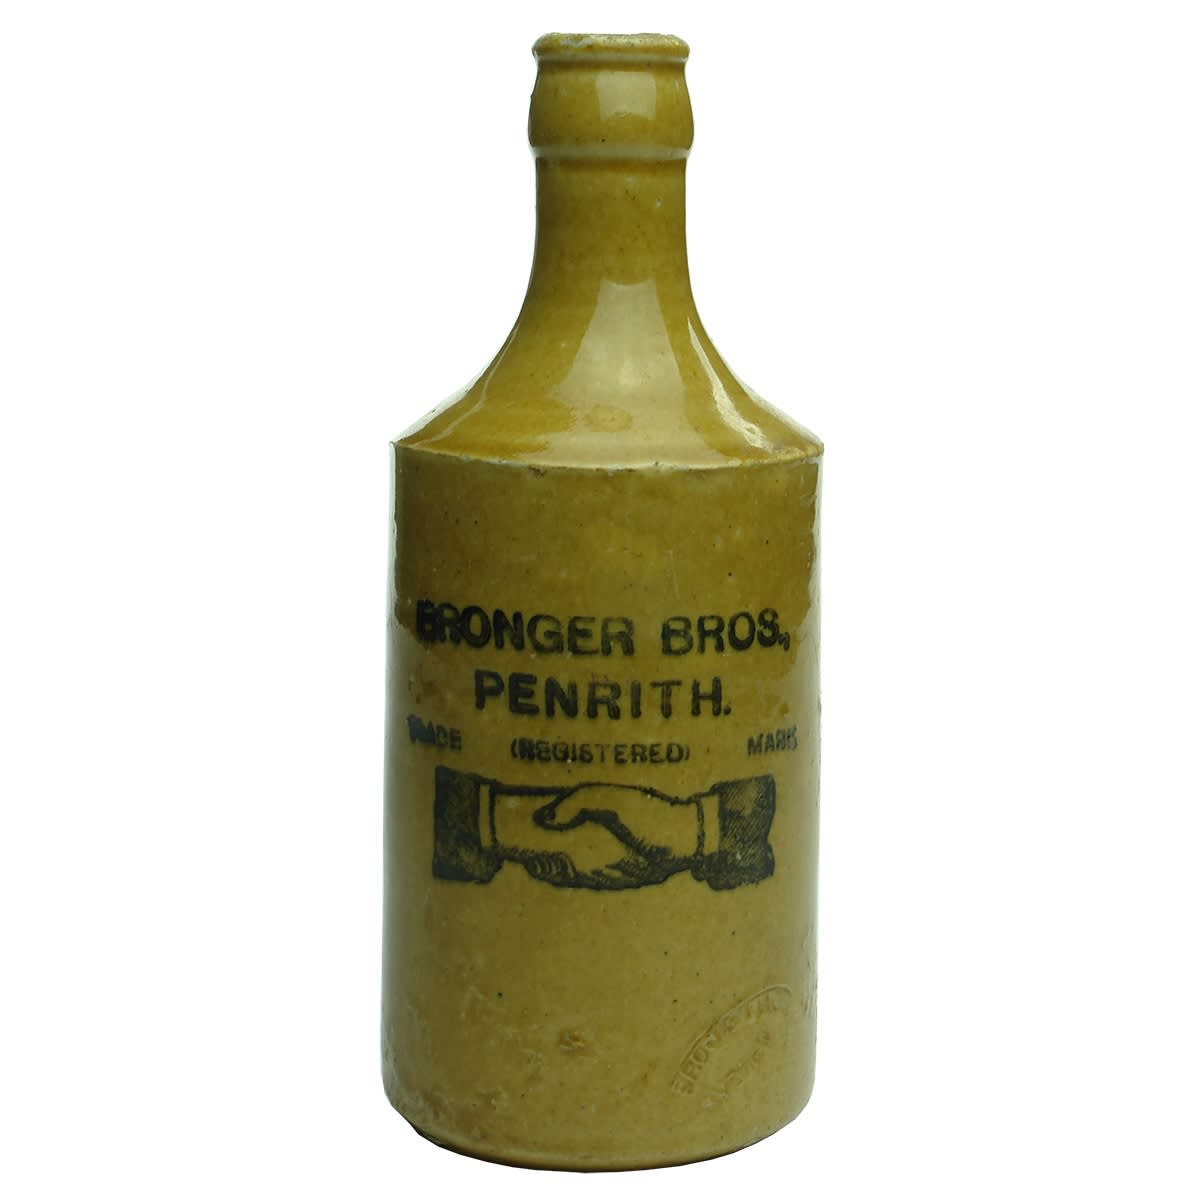 Ginger Beer. Bronger Bros., Penrith. All Tan. Crown Seal. (New South Wales)